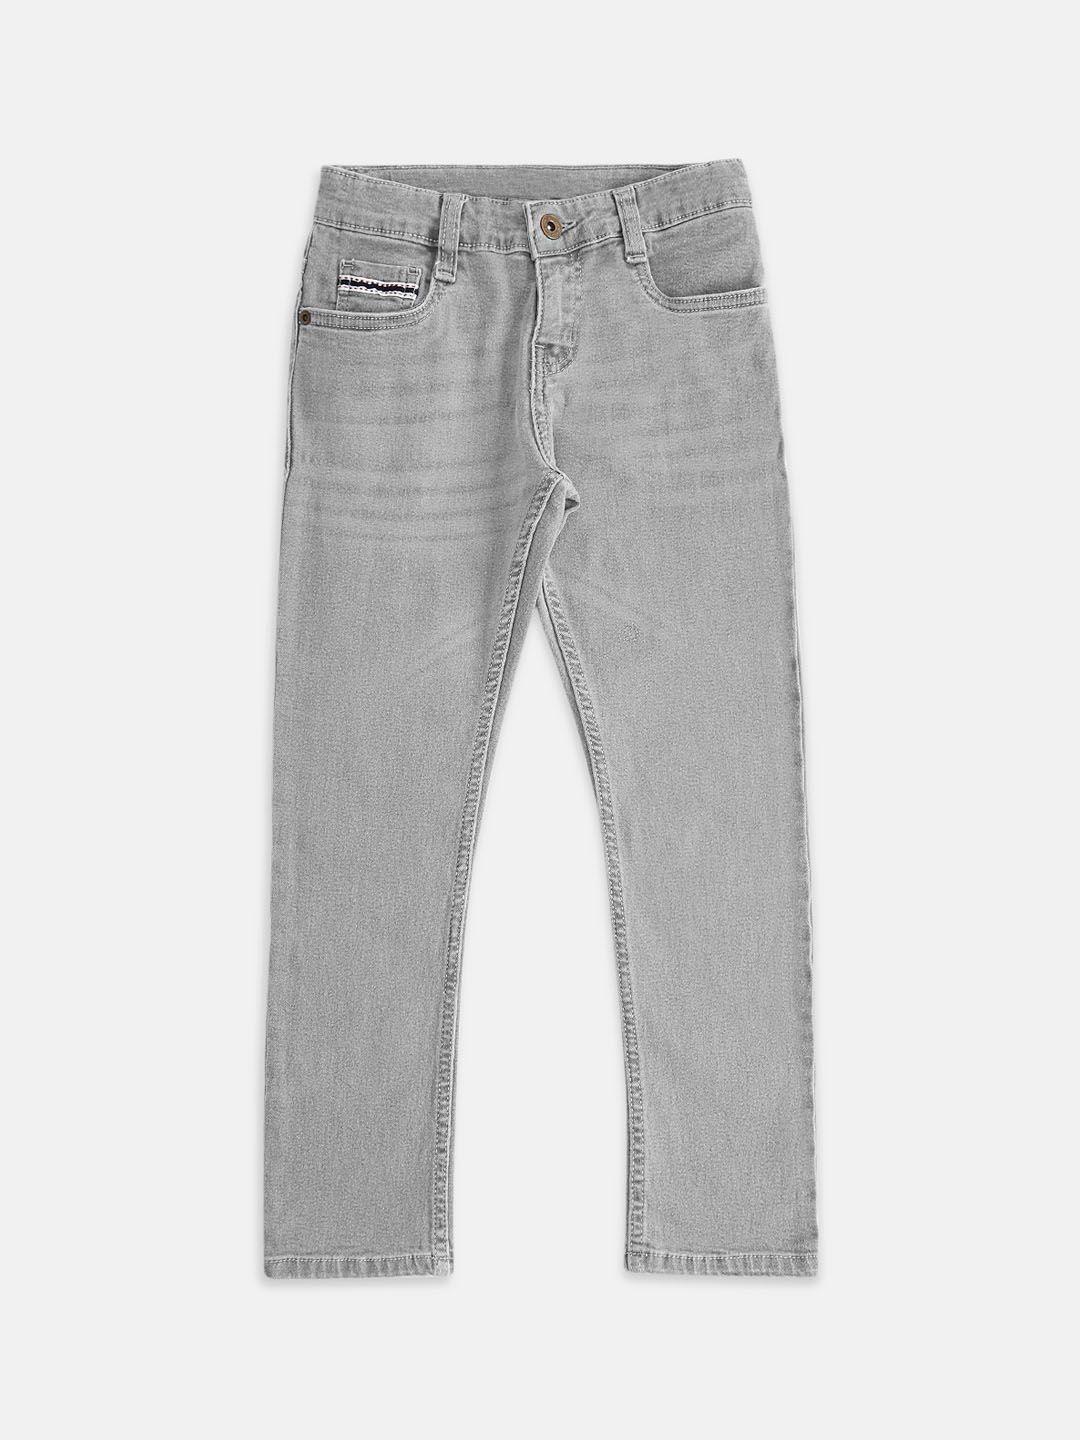 pantaloons junior boys grey tapered fit jeans